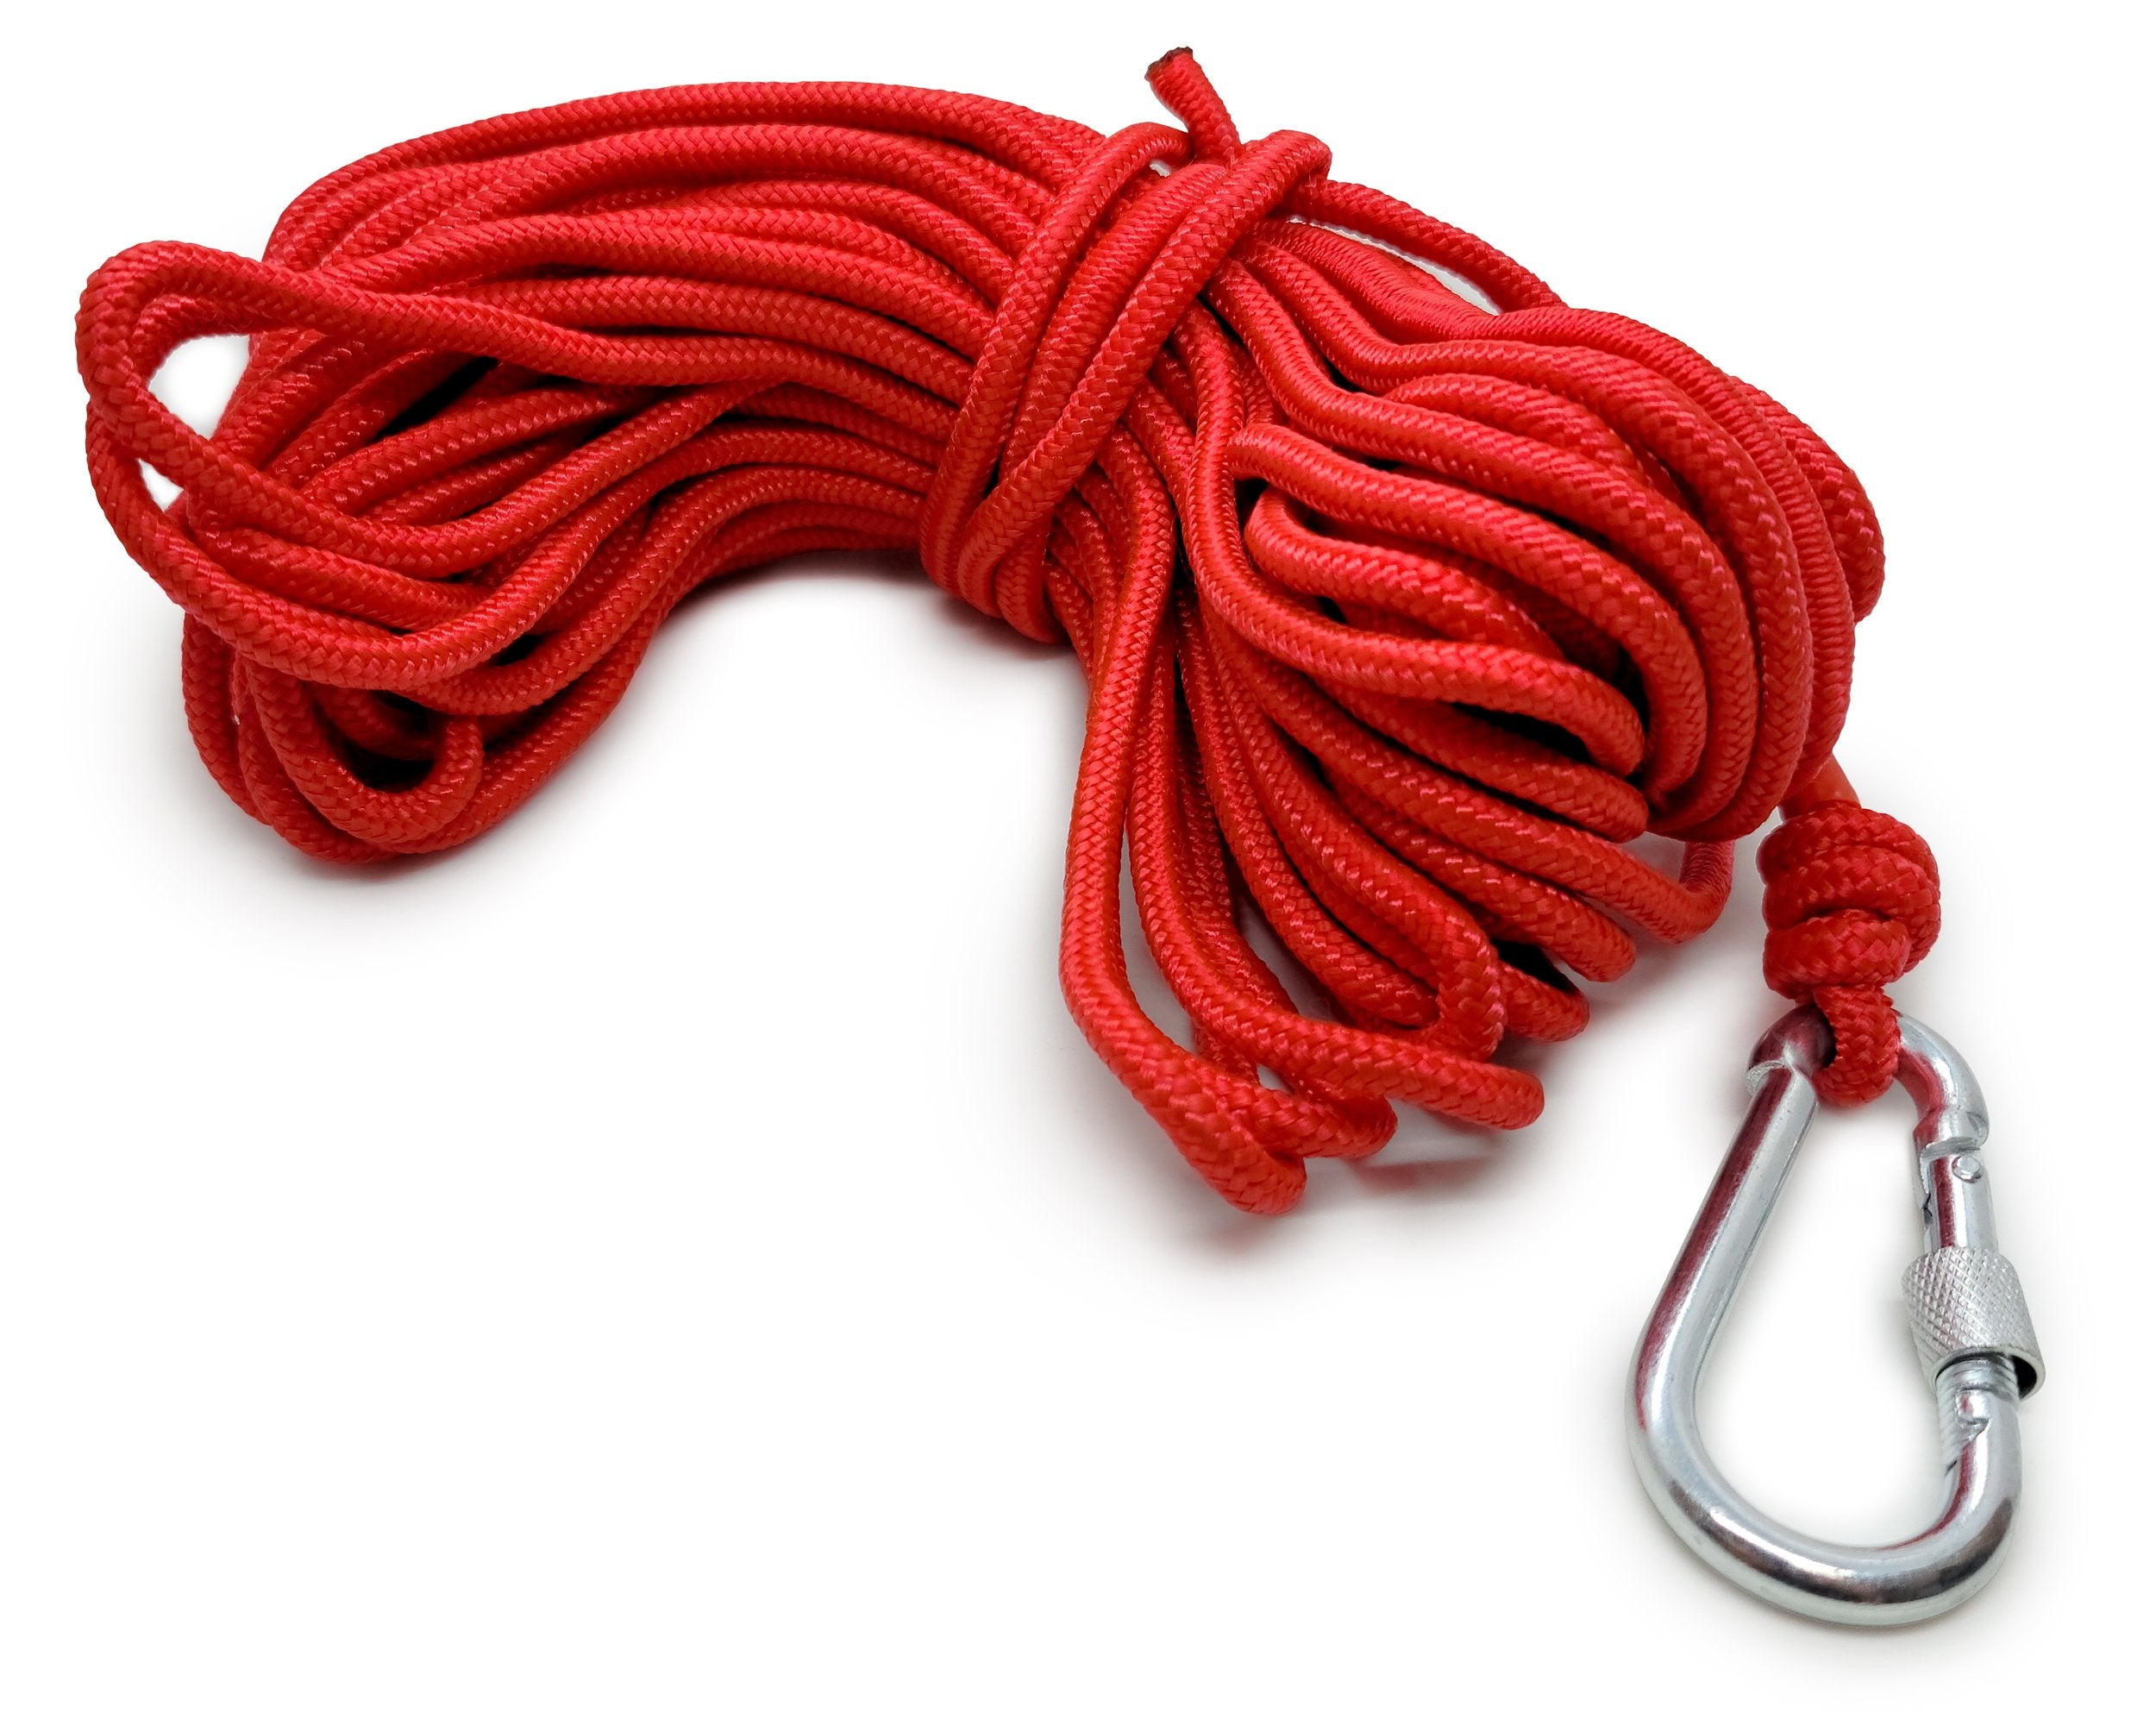 Magnet Fishing Rope Carabiner - 1200 lb Strength - Polyester Line - Outdoor